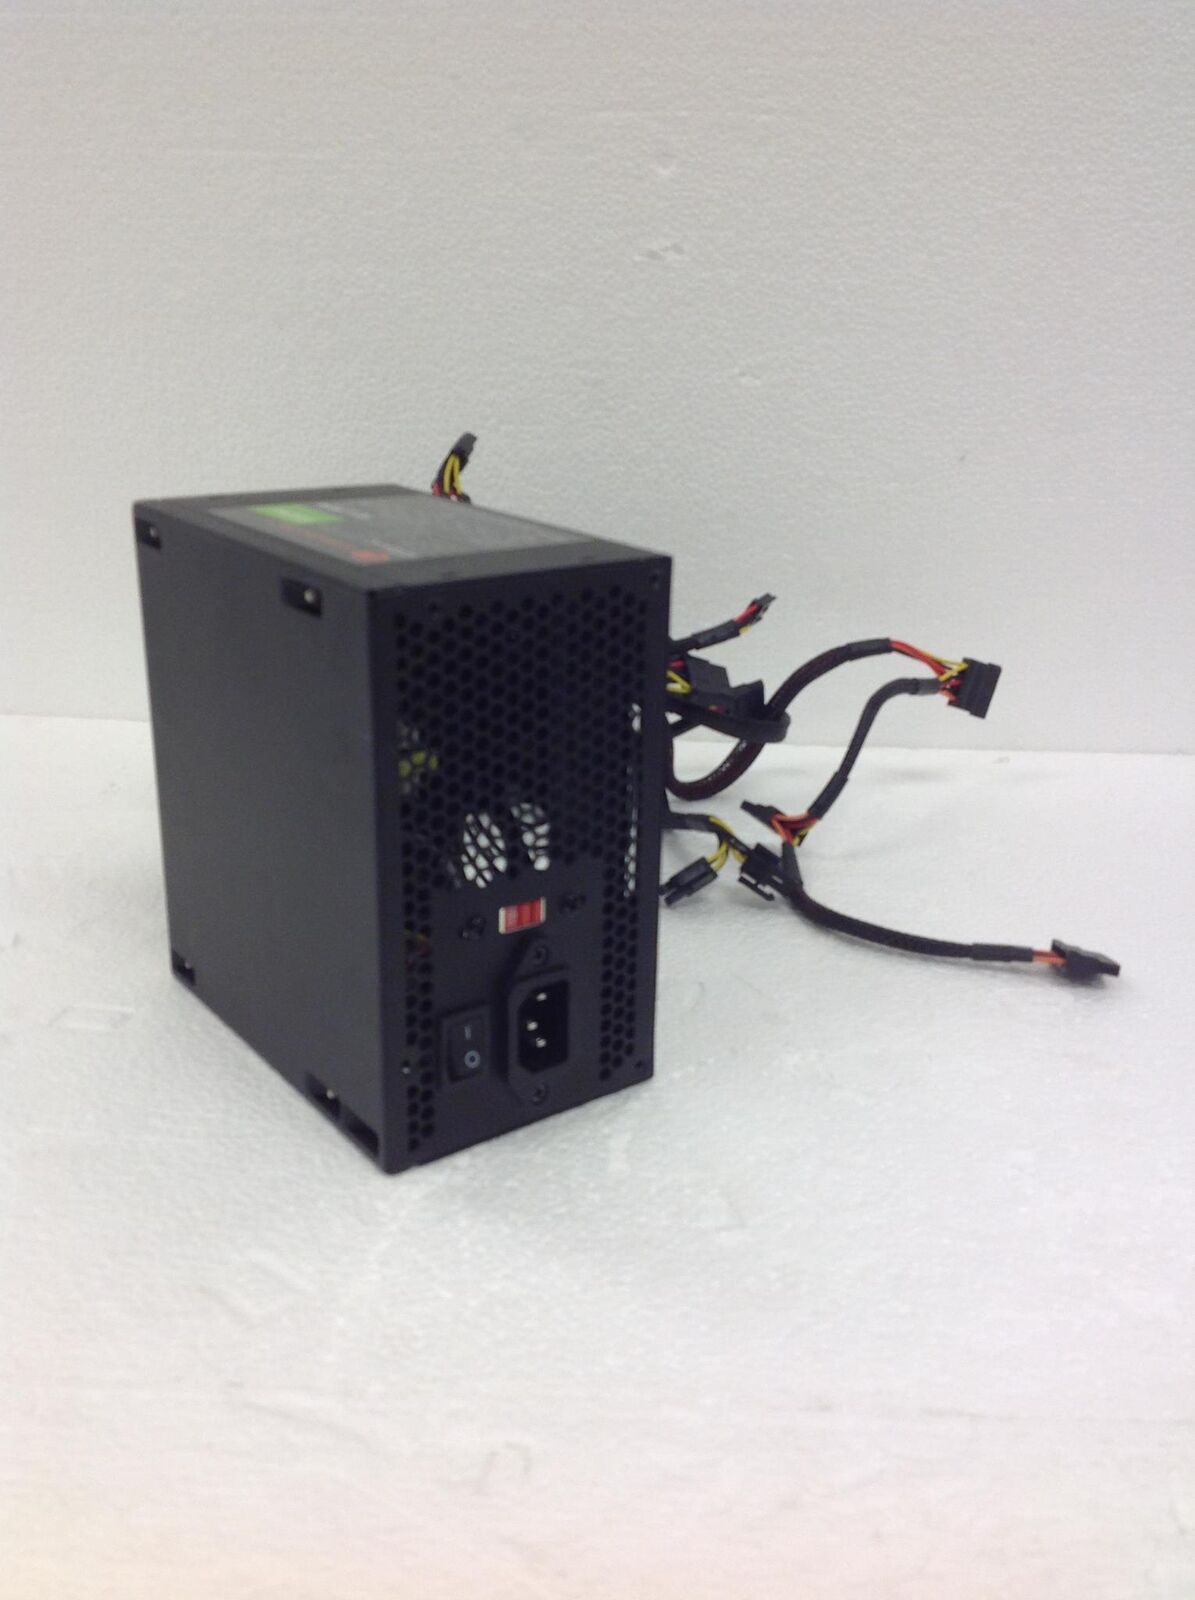 Apower AK Series Power Supply 680W Used  Great Deal